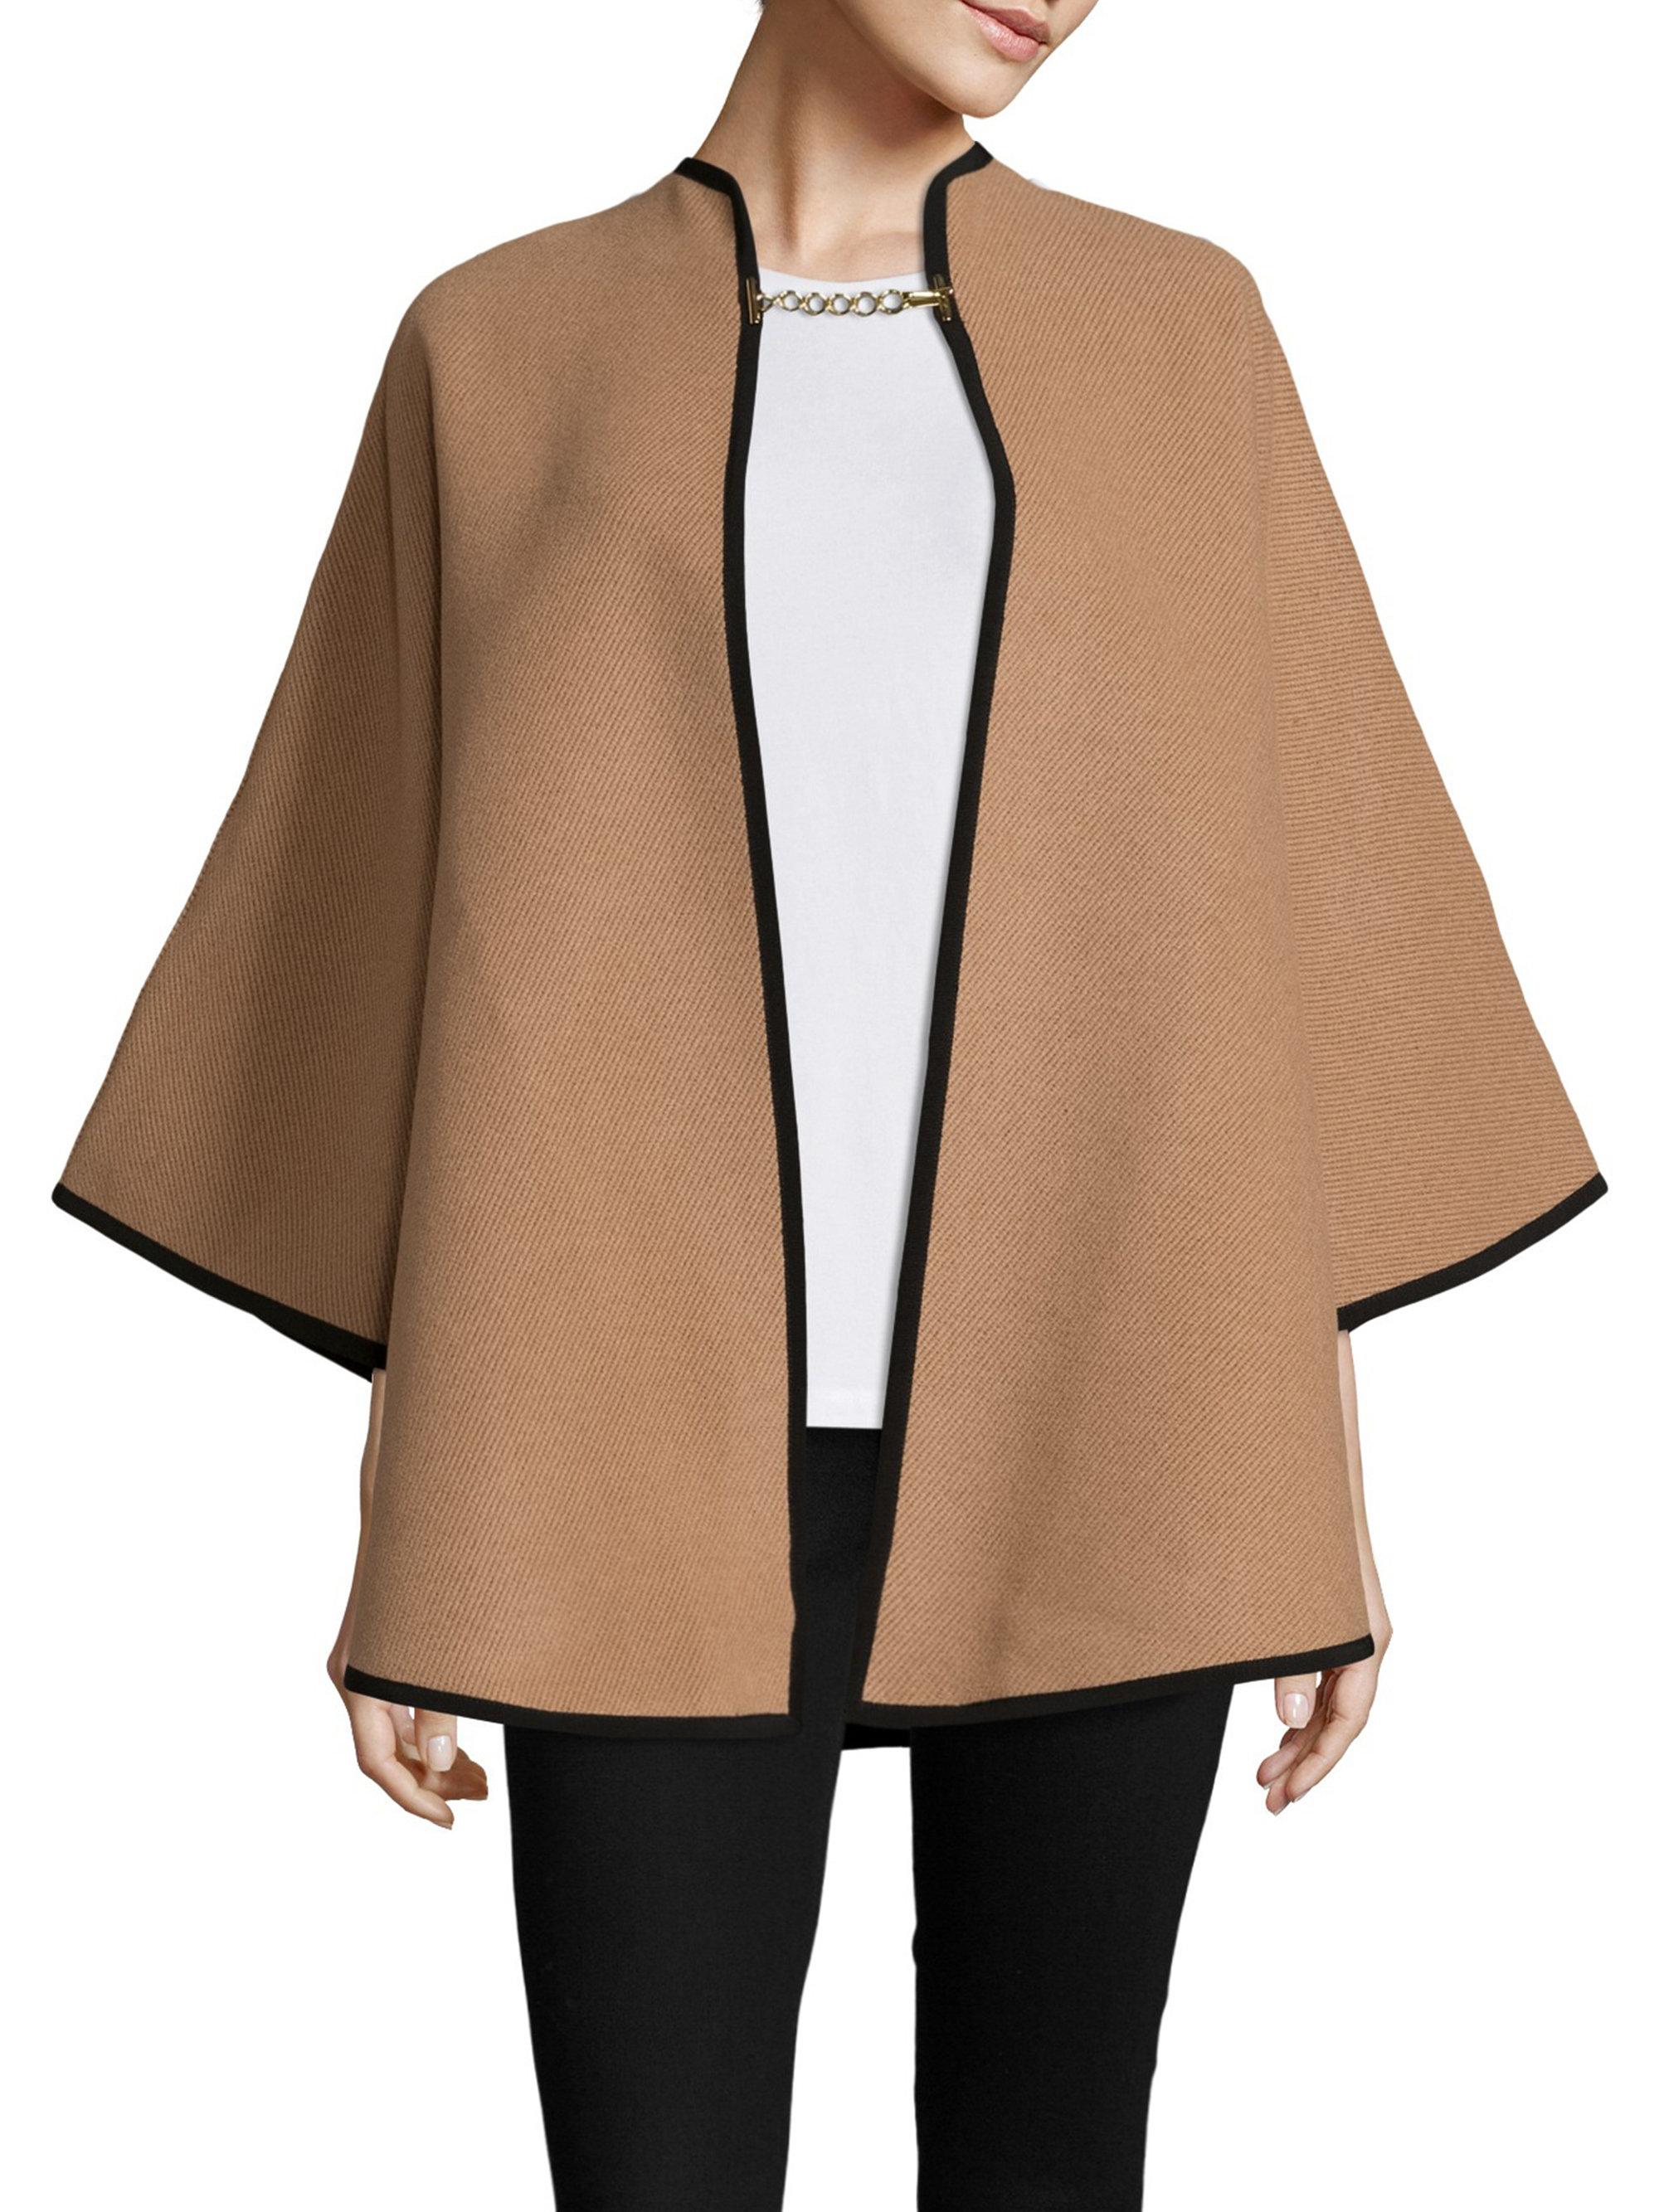 Burberry Wool & Cashmere Military Cape in Camel (Brown) - Lyst